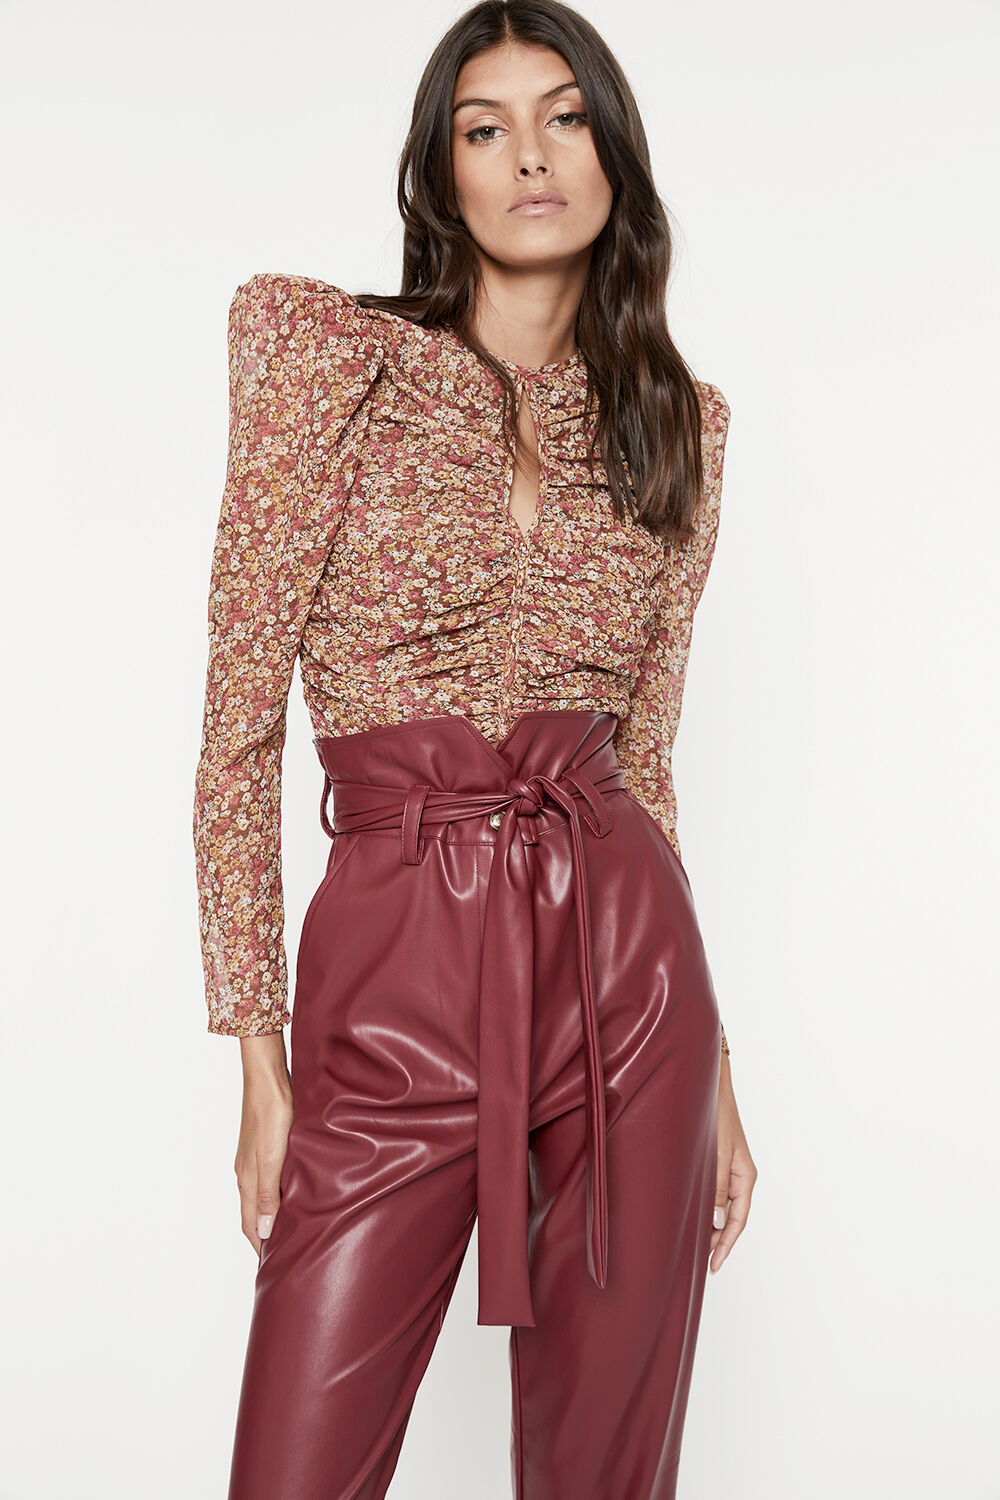 RUCHED DITSY FLORAL TOP in colour CAVIAR